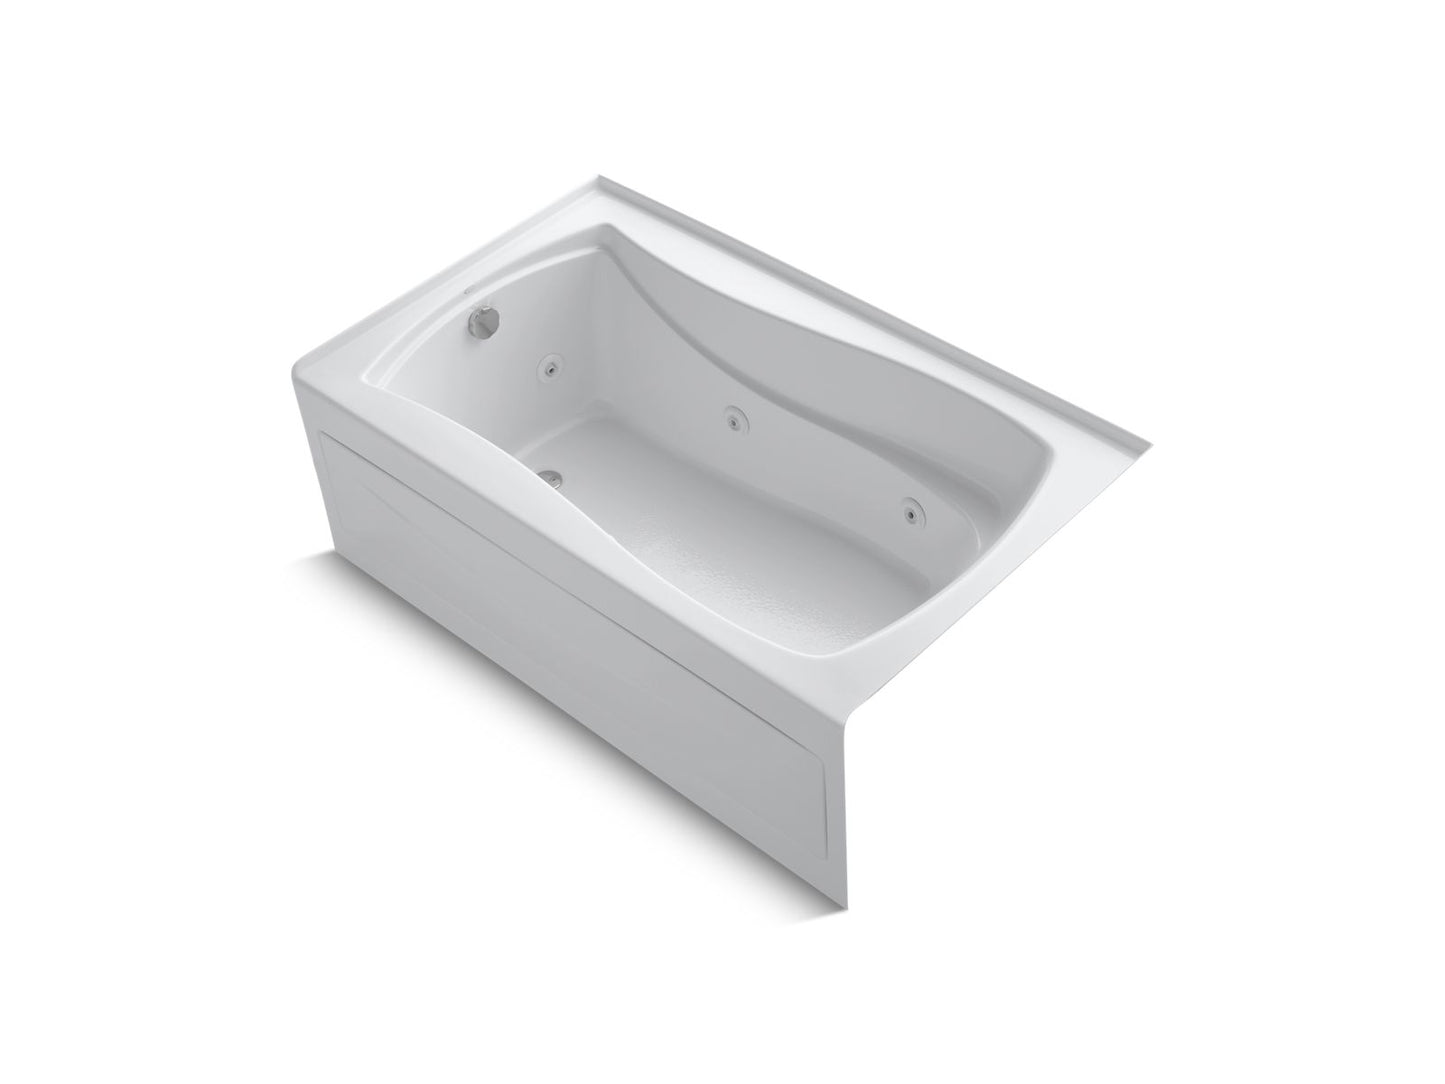 KOHLER K-1239-LAW-0 Mariposa 60" X 36" Alcove Whirlpool Bath With Bask Heated Surface, Left Drain In White